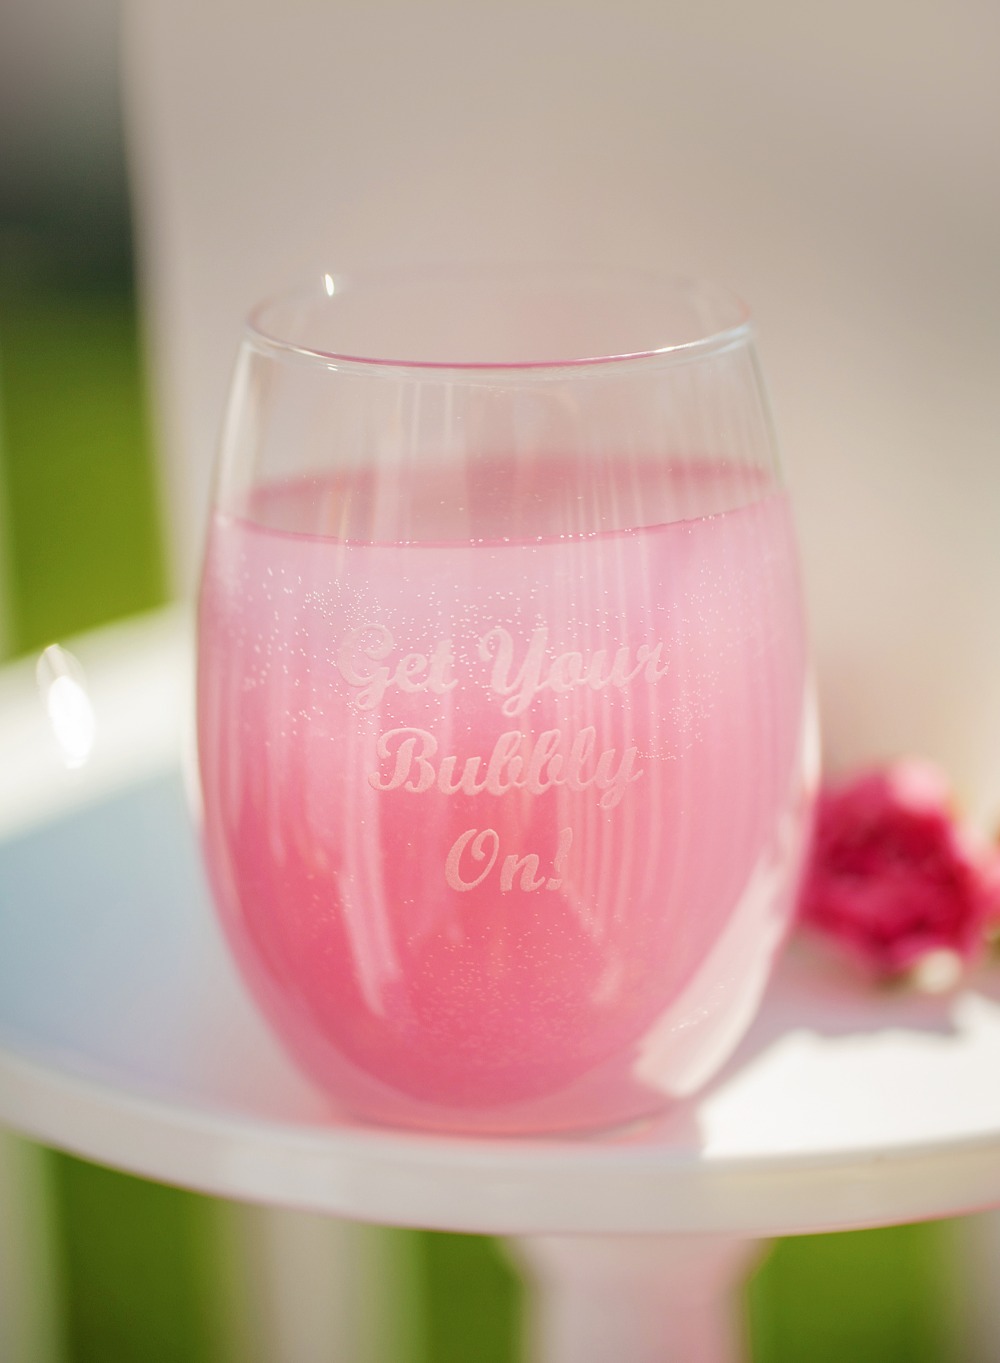 Get your bubbly on bridal shower glass